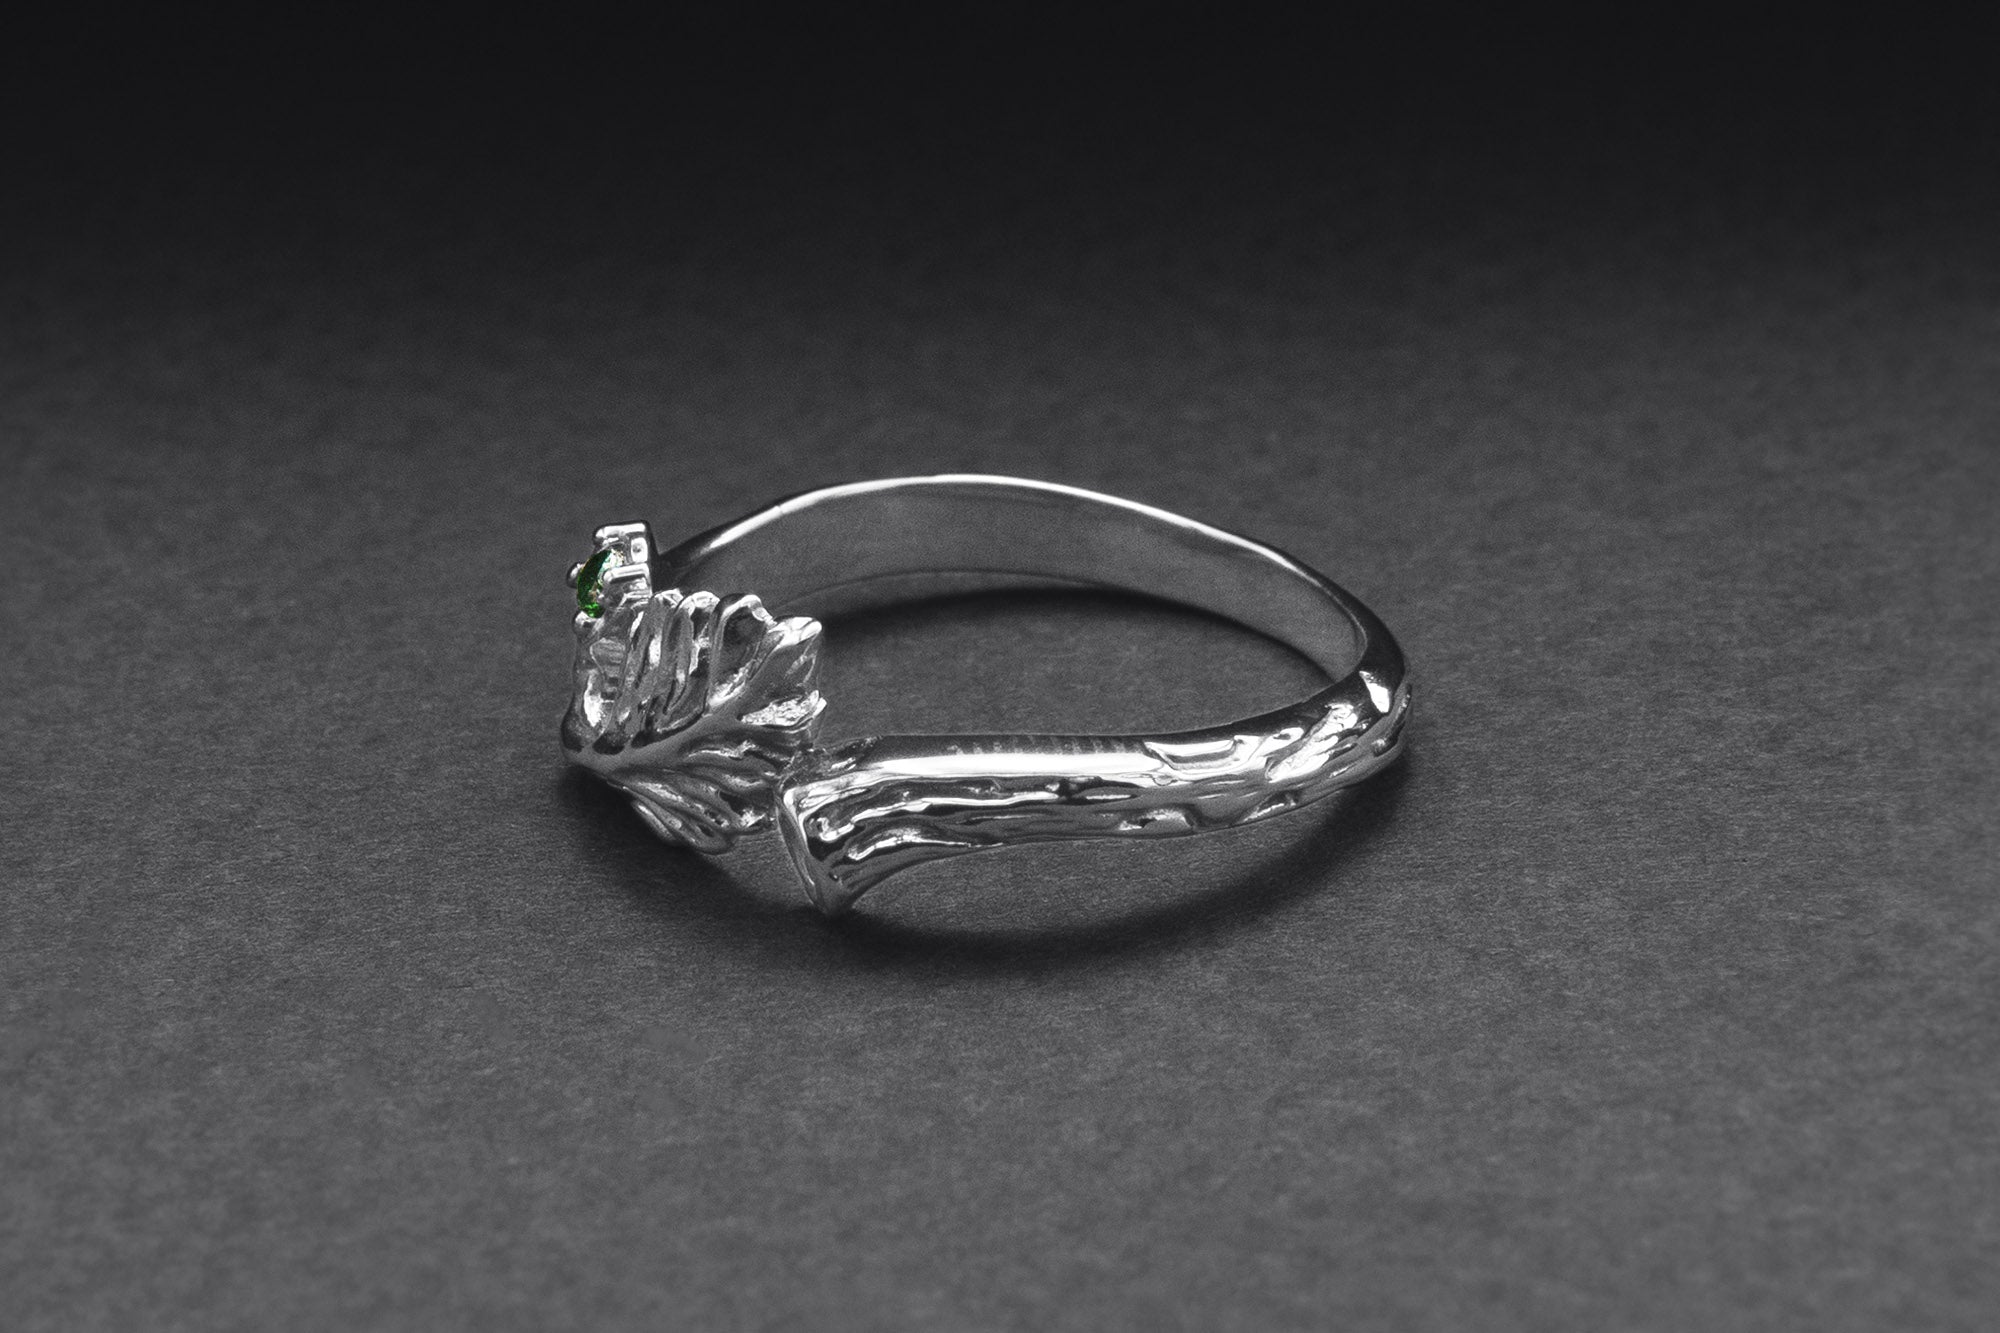 950 Platinum Branch Ring with Leaves and Green Gem, Unique Handmade Jewelry - vikingworkshop